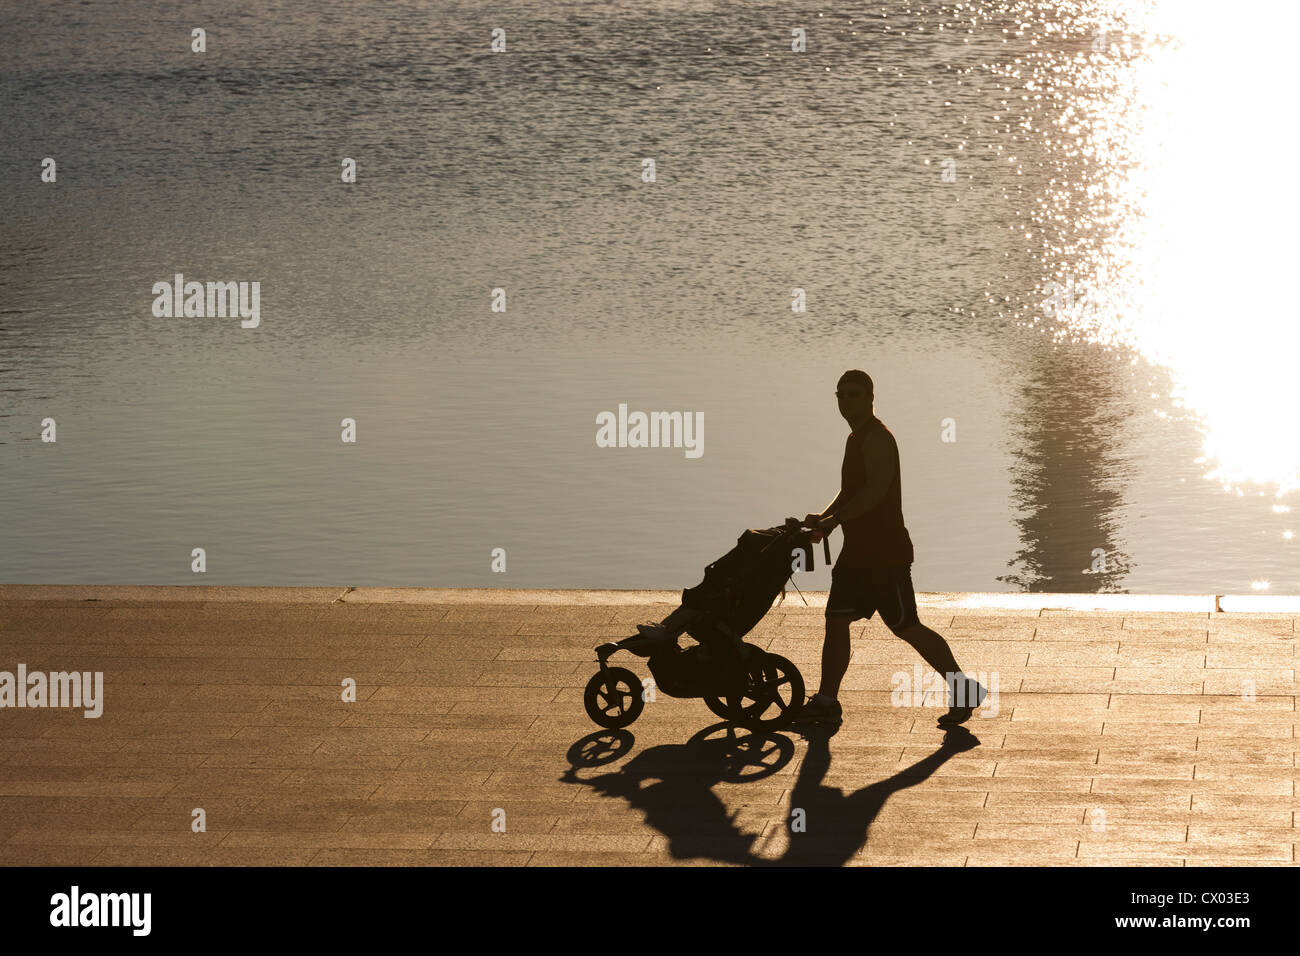 A man pushing a baby stroller in early morning light Stock Photo